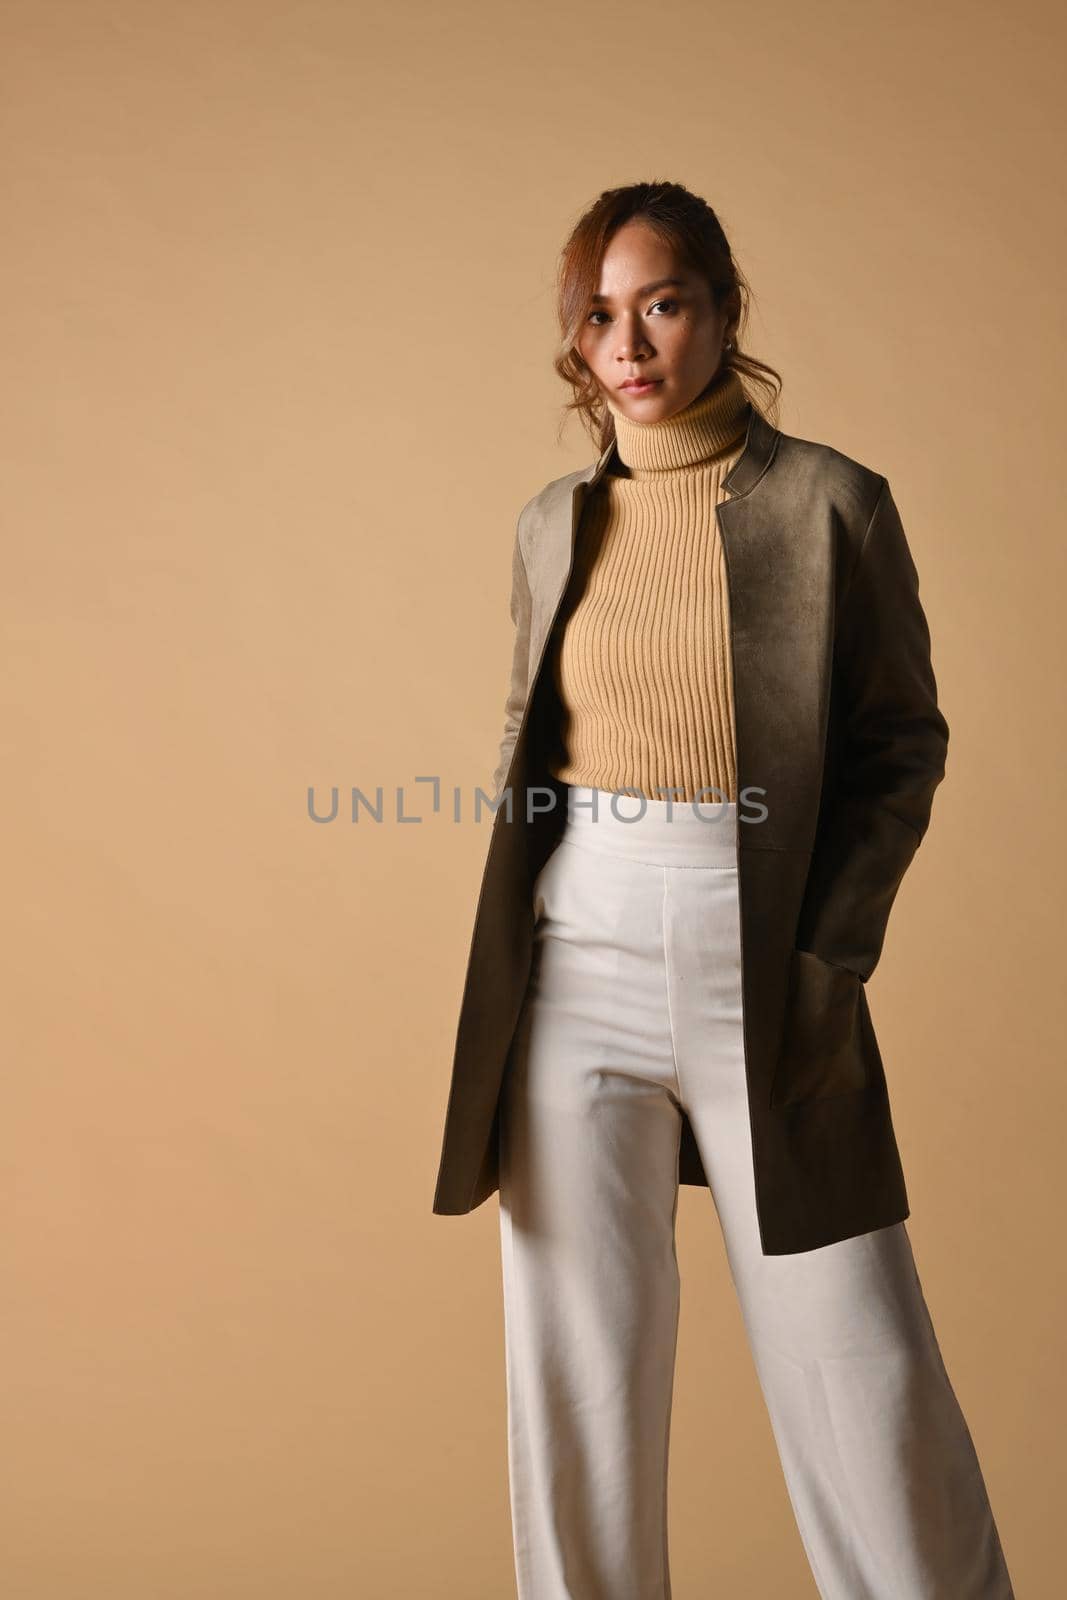 Portrait of tendy woman wiith trench coat standing on beige background. Fashion studio photo, Autumn and Winter concept by prathanchorruangsak